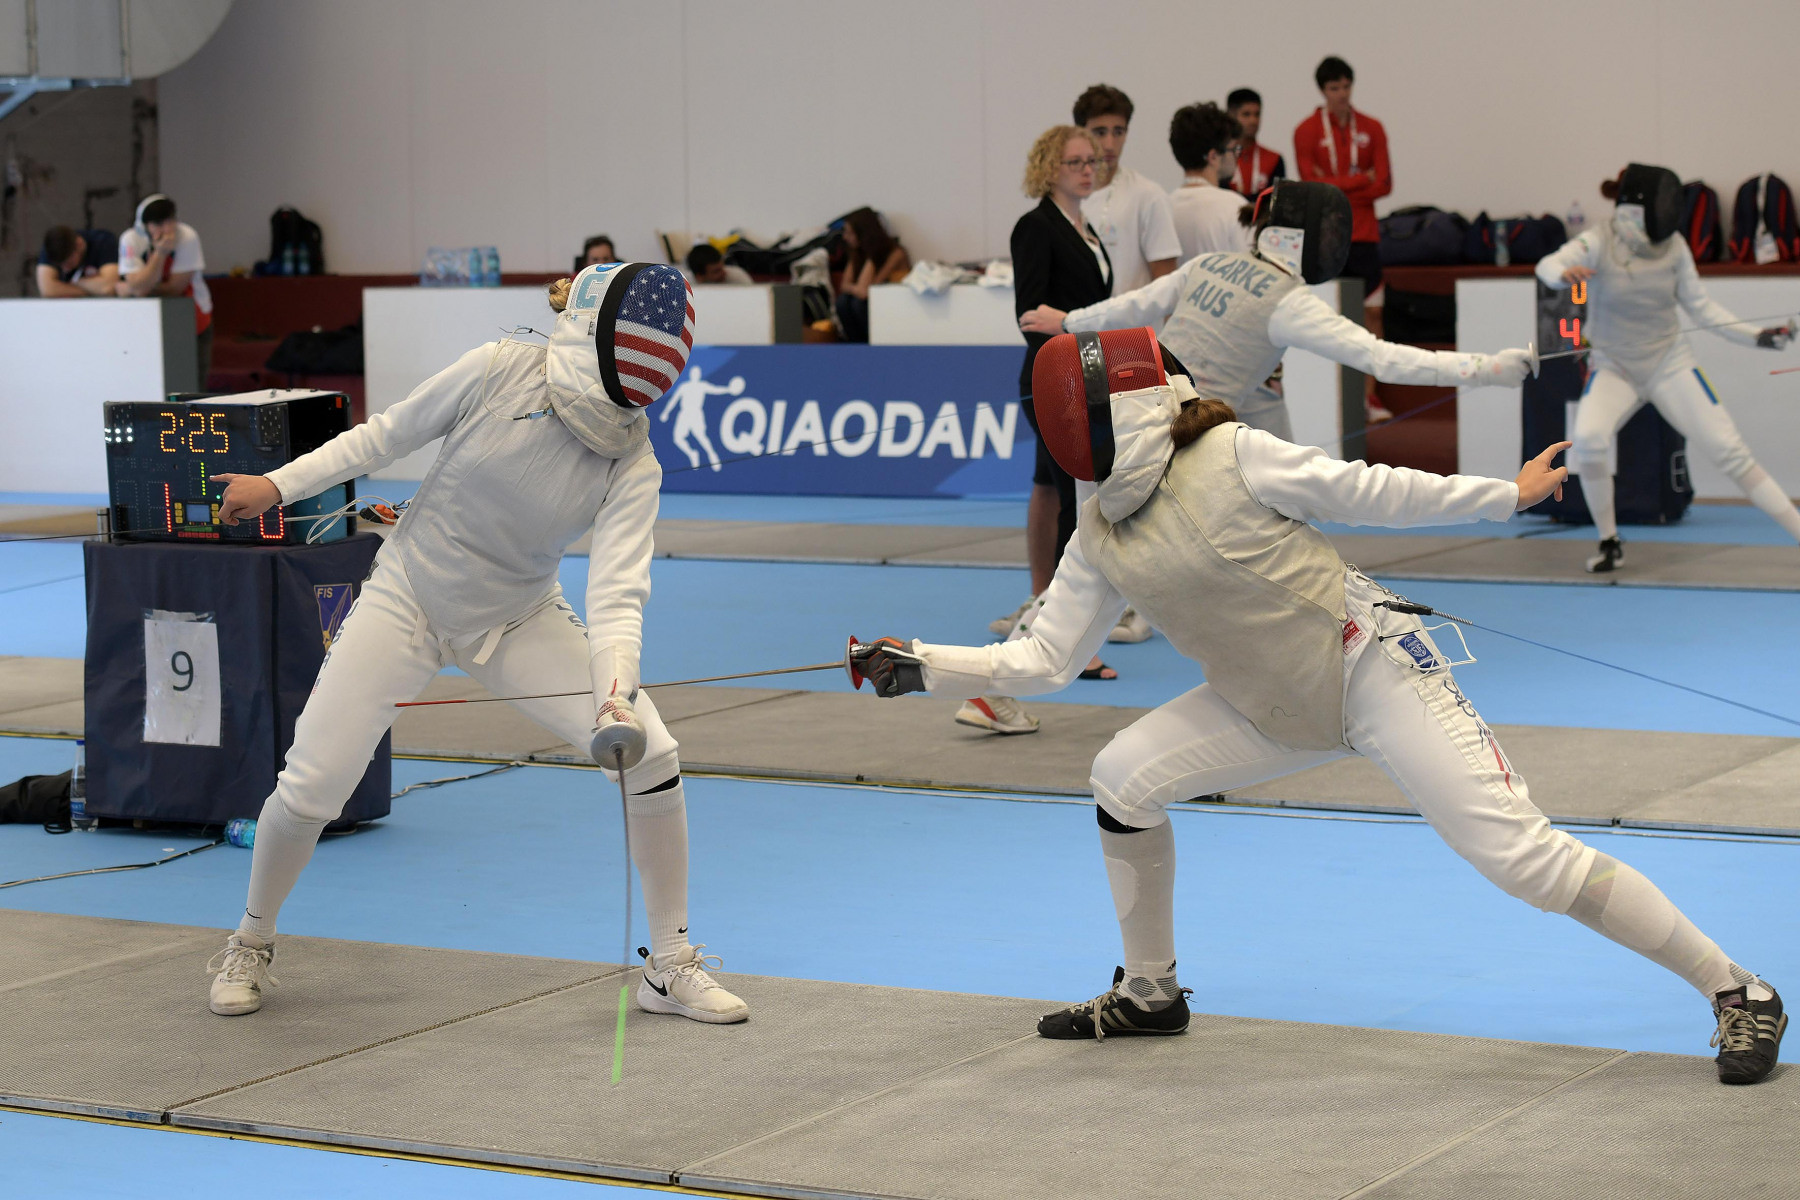 CUS Salerno hosted the second day of fencing ©Naples 2019